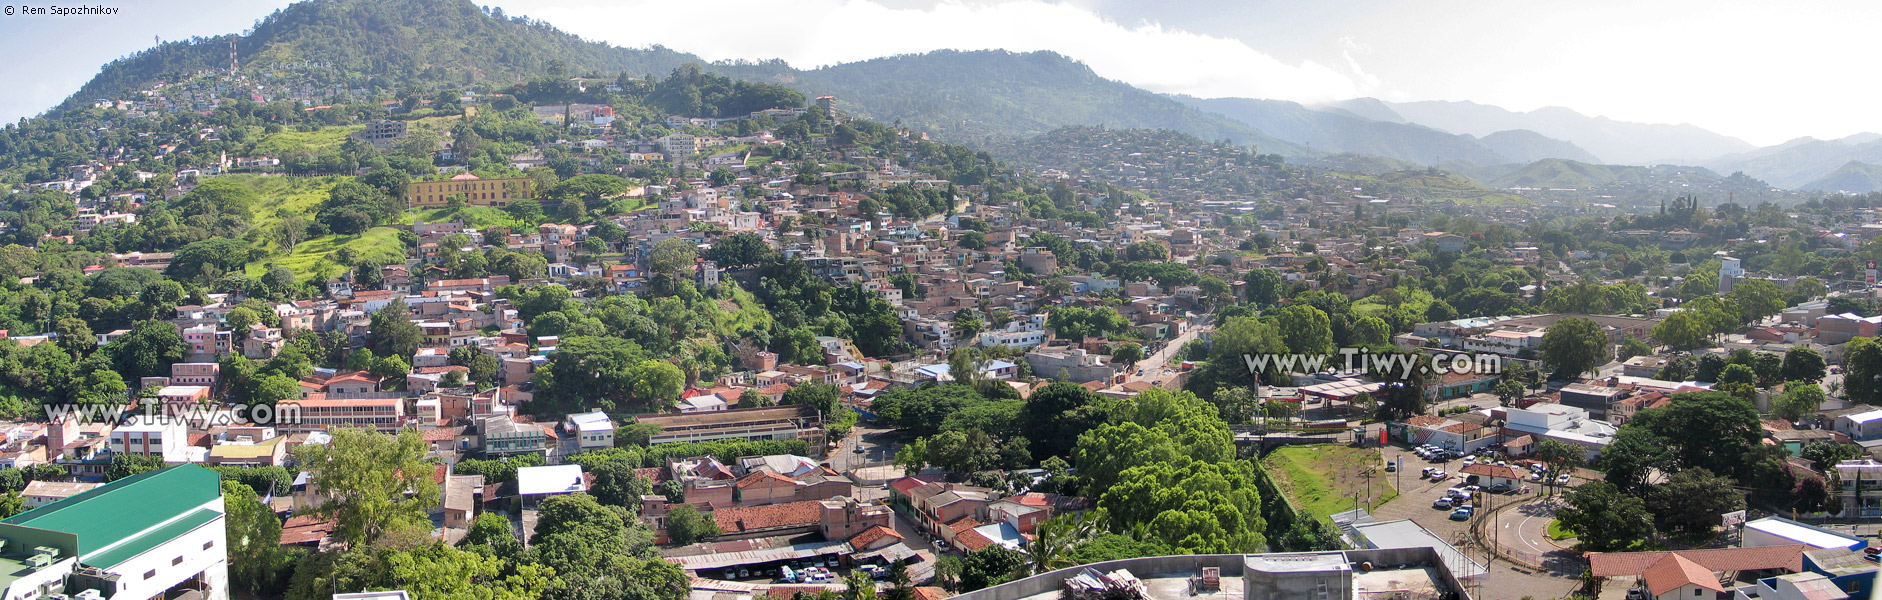 View of Tegucigalpa from the balcony of «Plaza Libertador» hotel